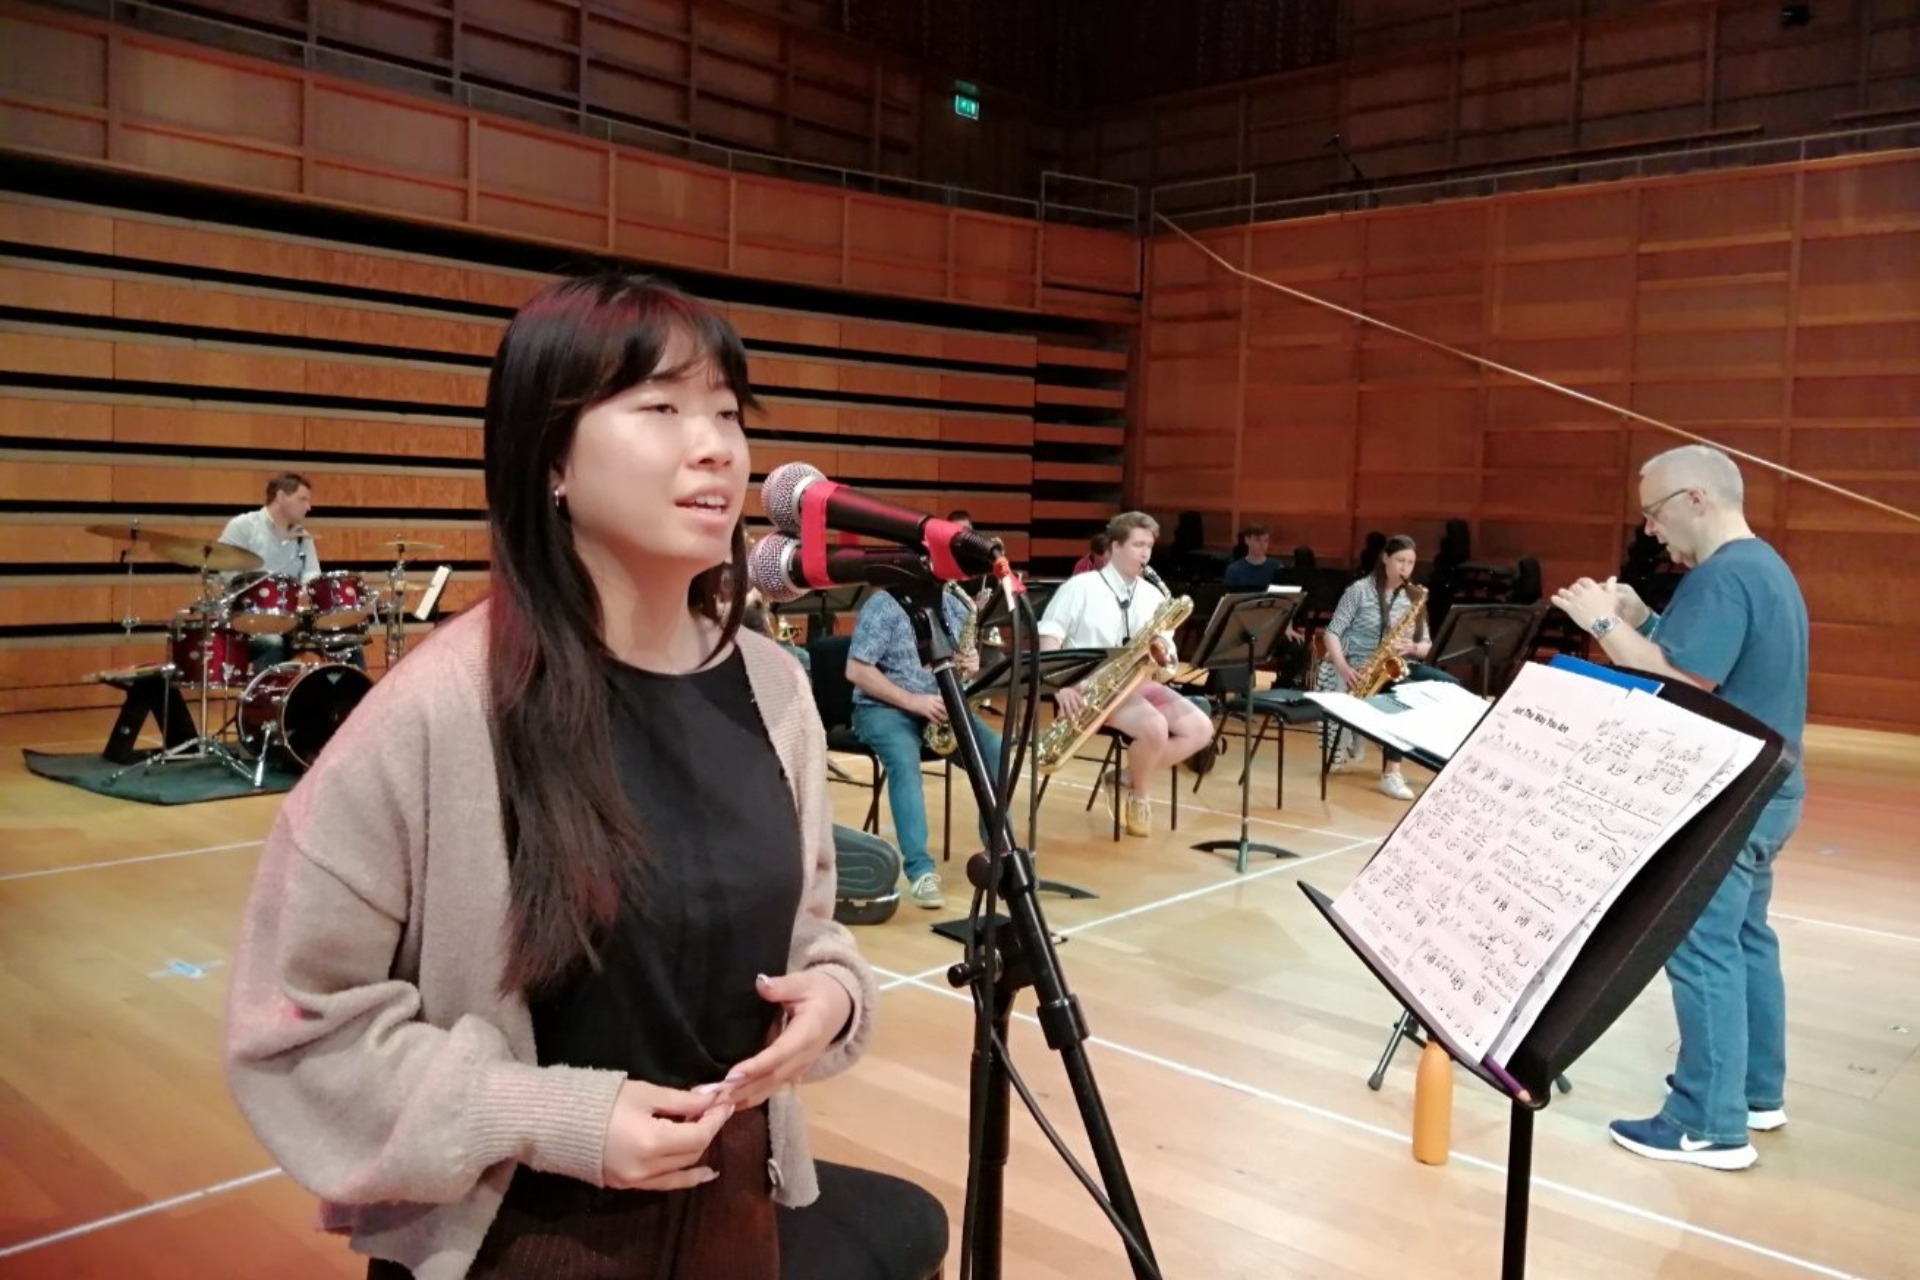 Elle Soo rehearsing earlier this month for the Big Band performance